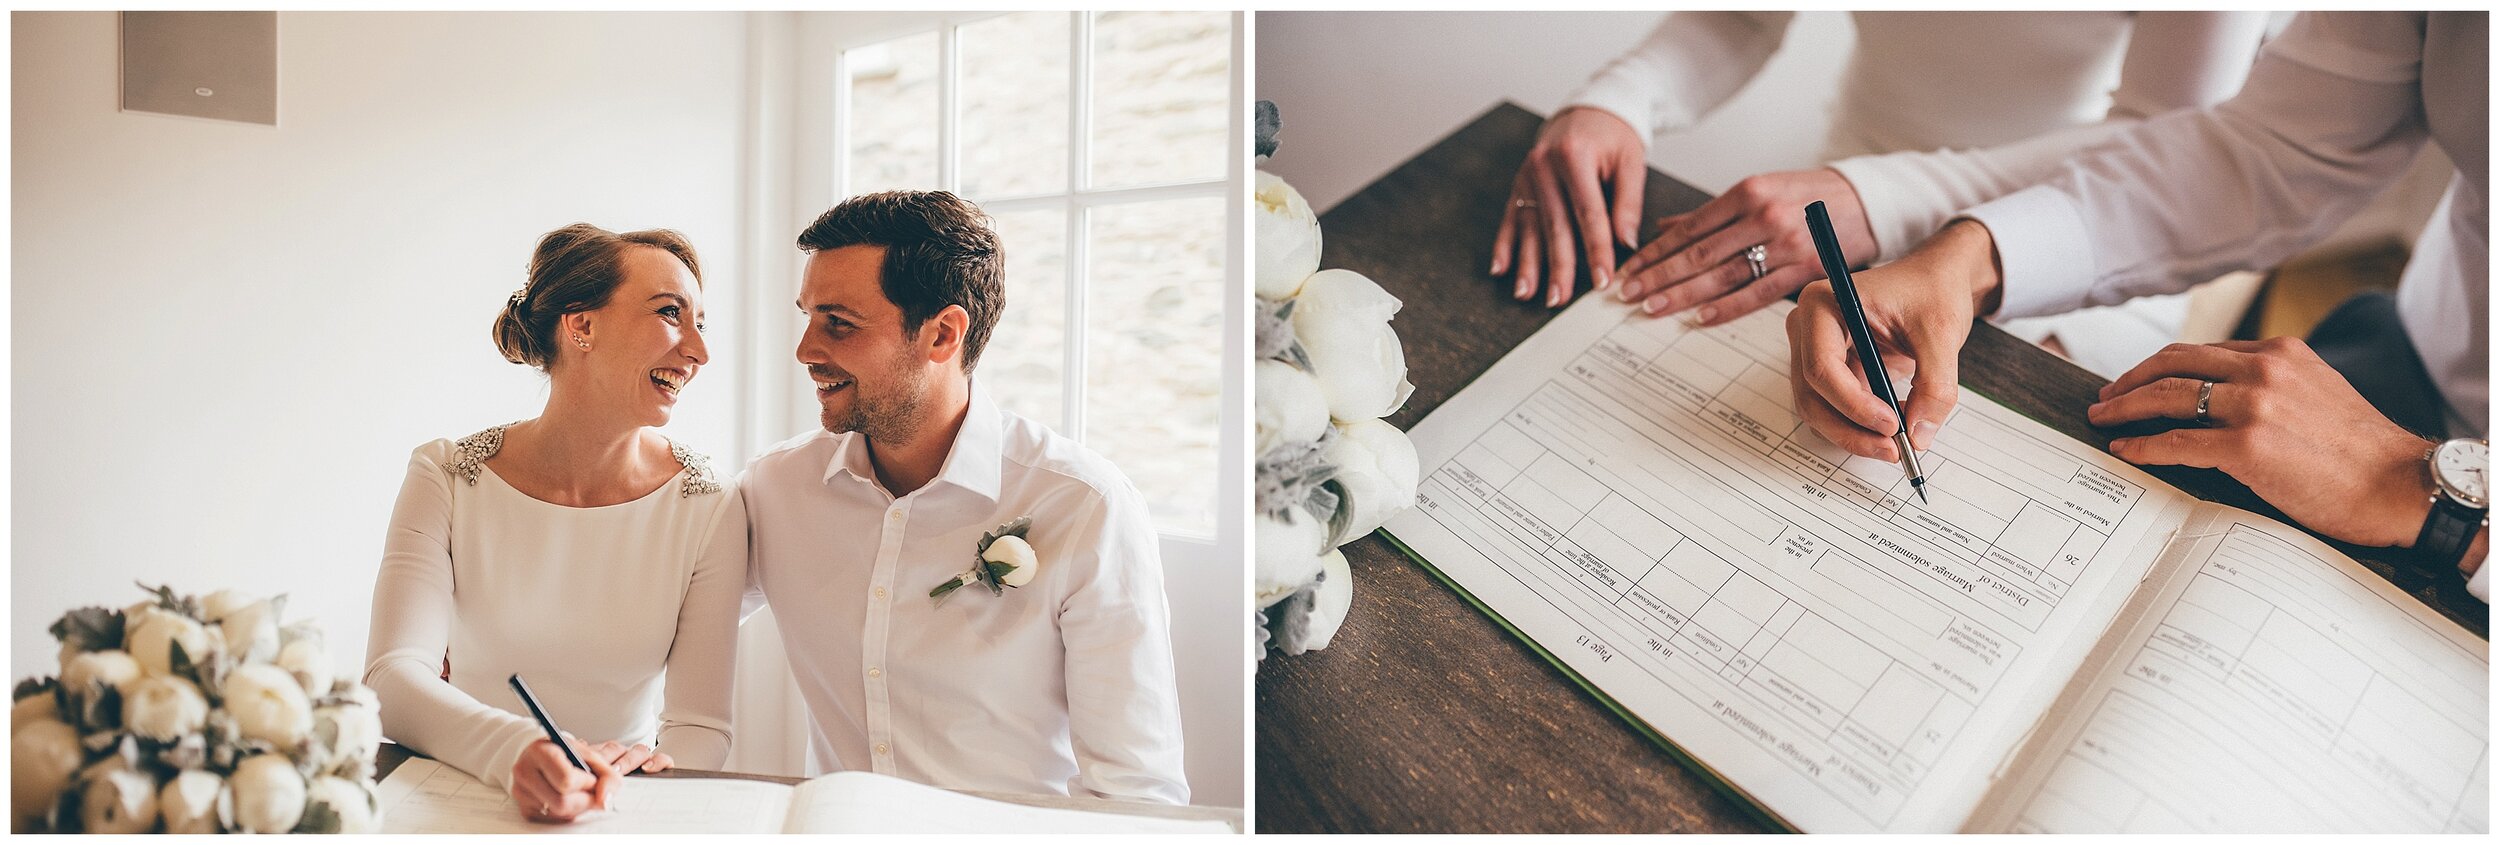 Bride and groom sign their wedding register at Silverholme Manor at the Graythwaite Estate in the Lake district.